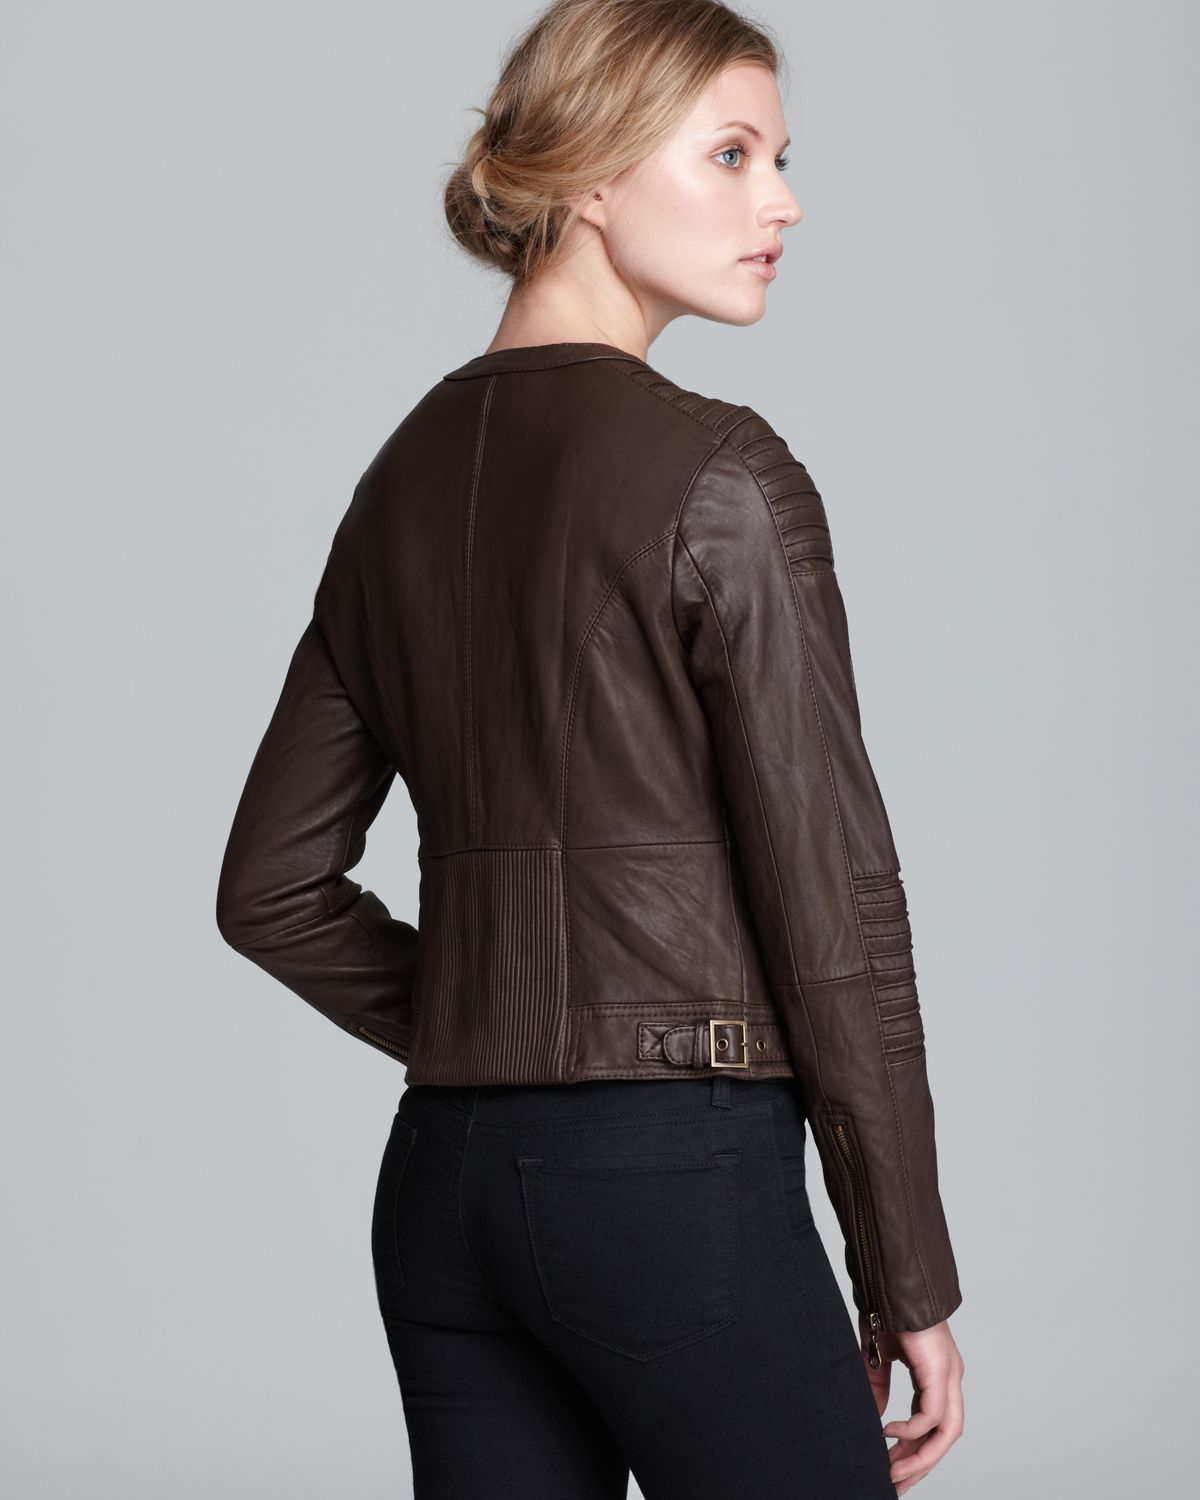 Lyst - Dkny Leather Jacket - Collarless Shoulder Seaming in Natural